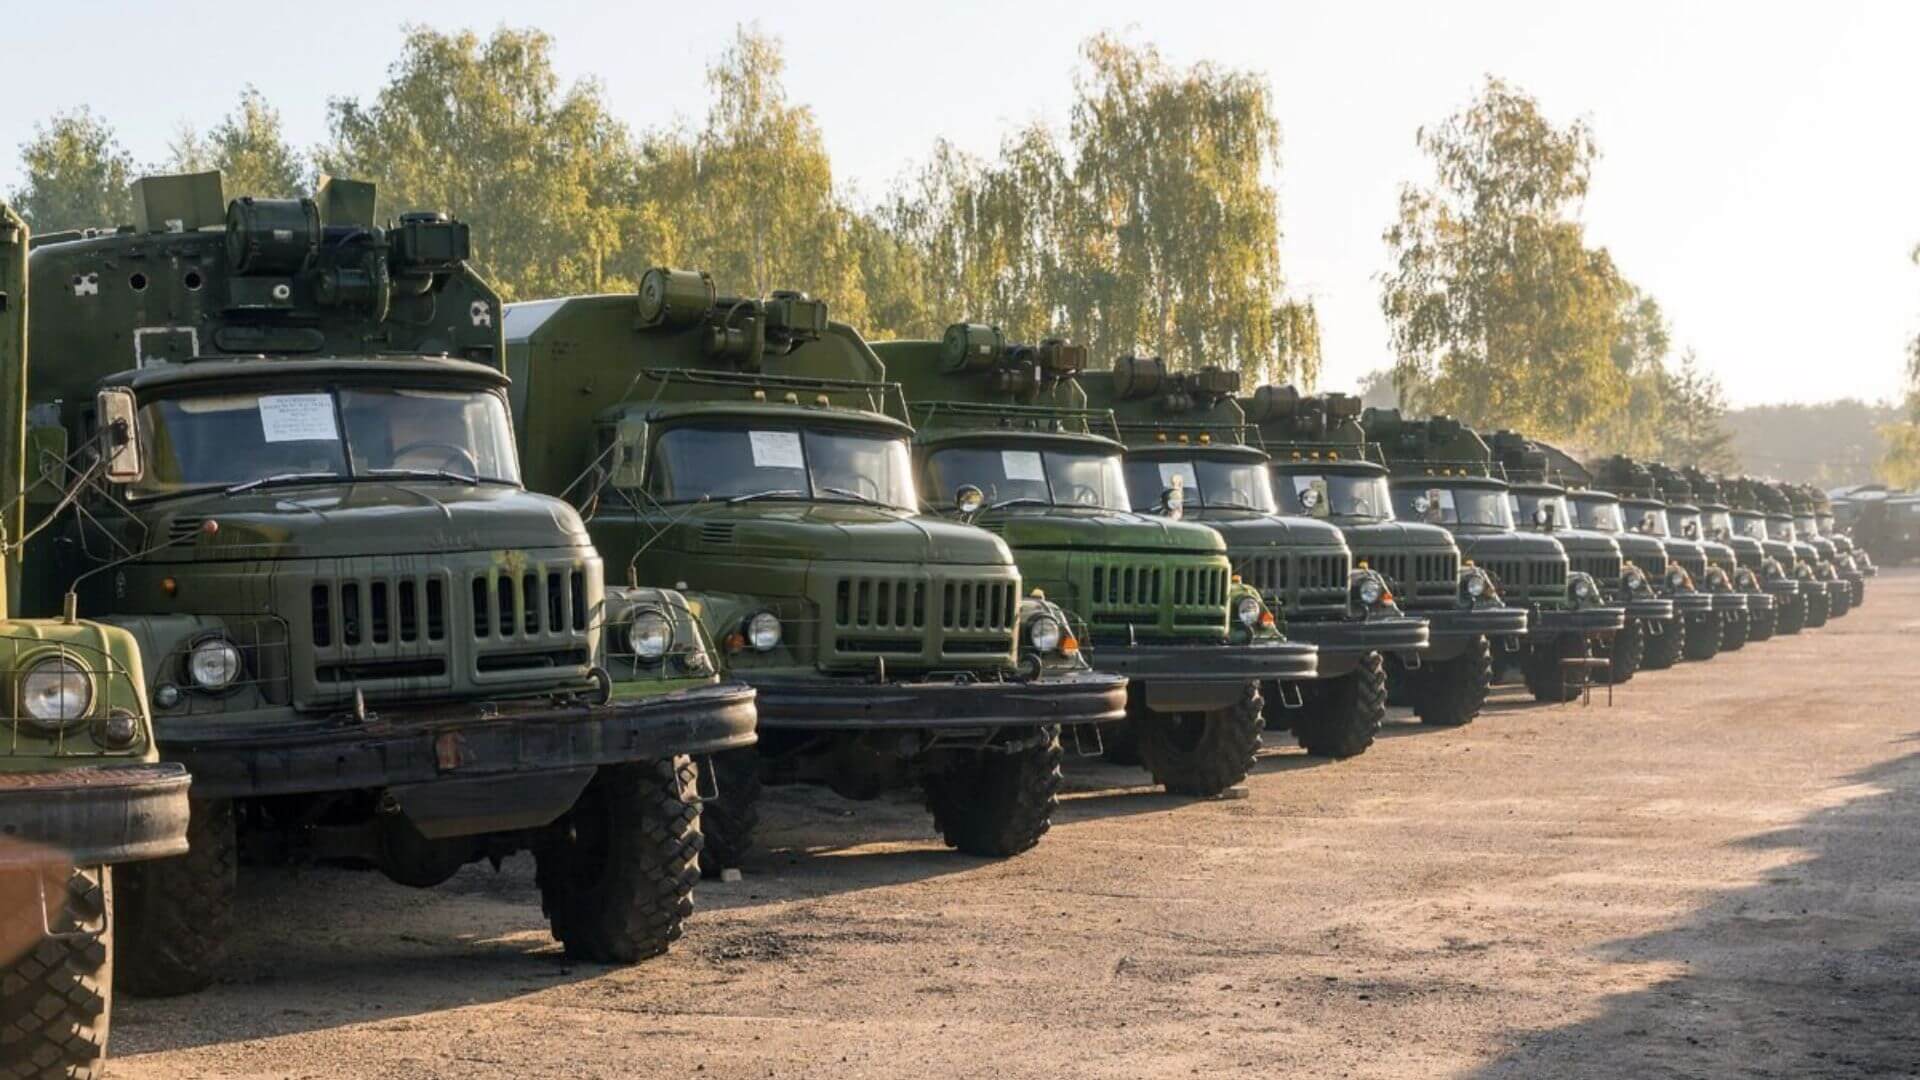 A year ago, equipment of the Belarusian Armed Forces was sent to Russia for modernization. The list surprisingly coincides with the equipment that the Russian Armed Forces desperately needed